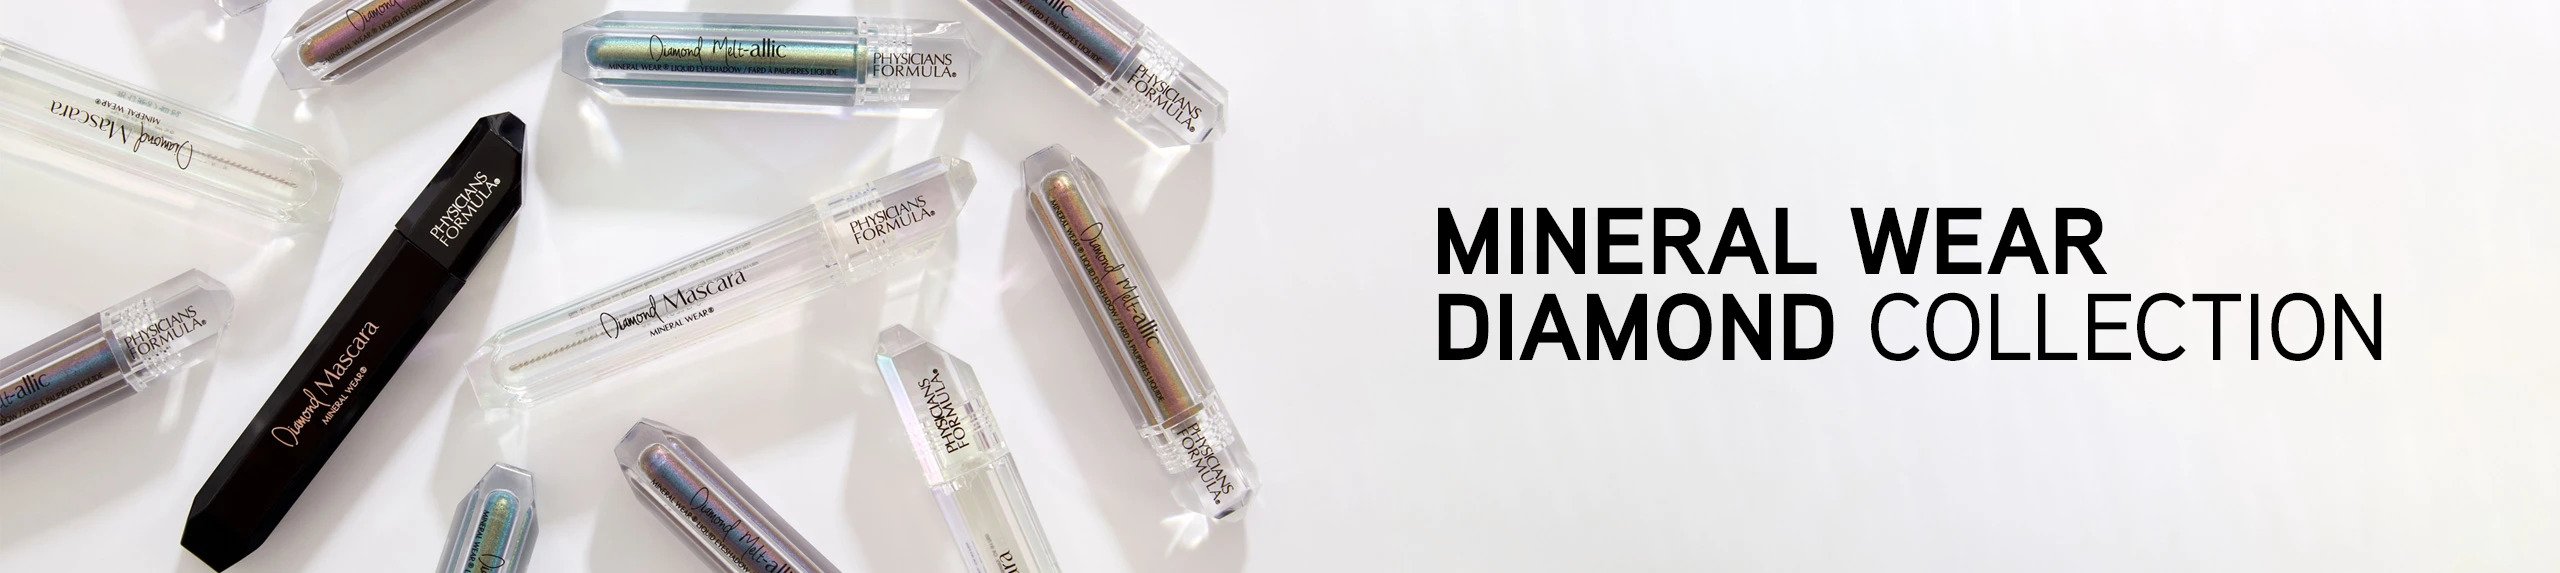 Mineral Wear Diamond Collection